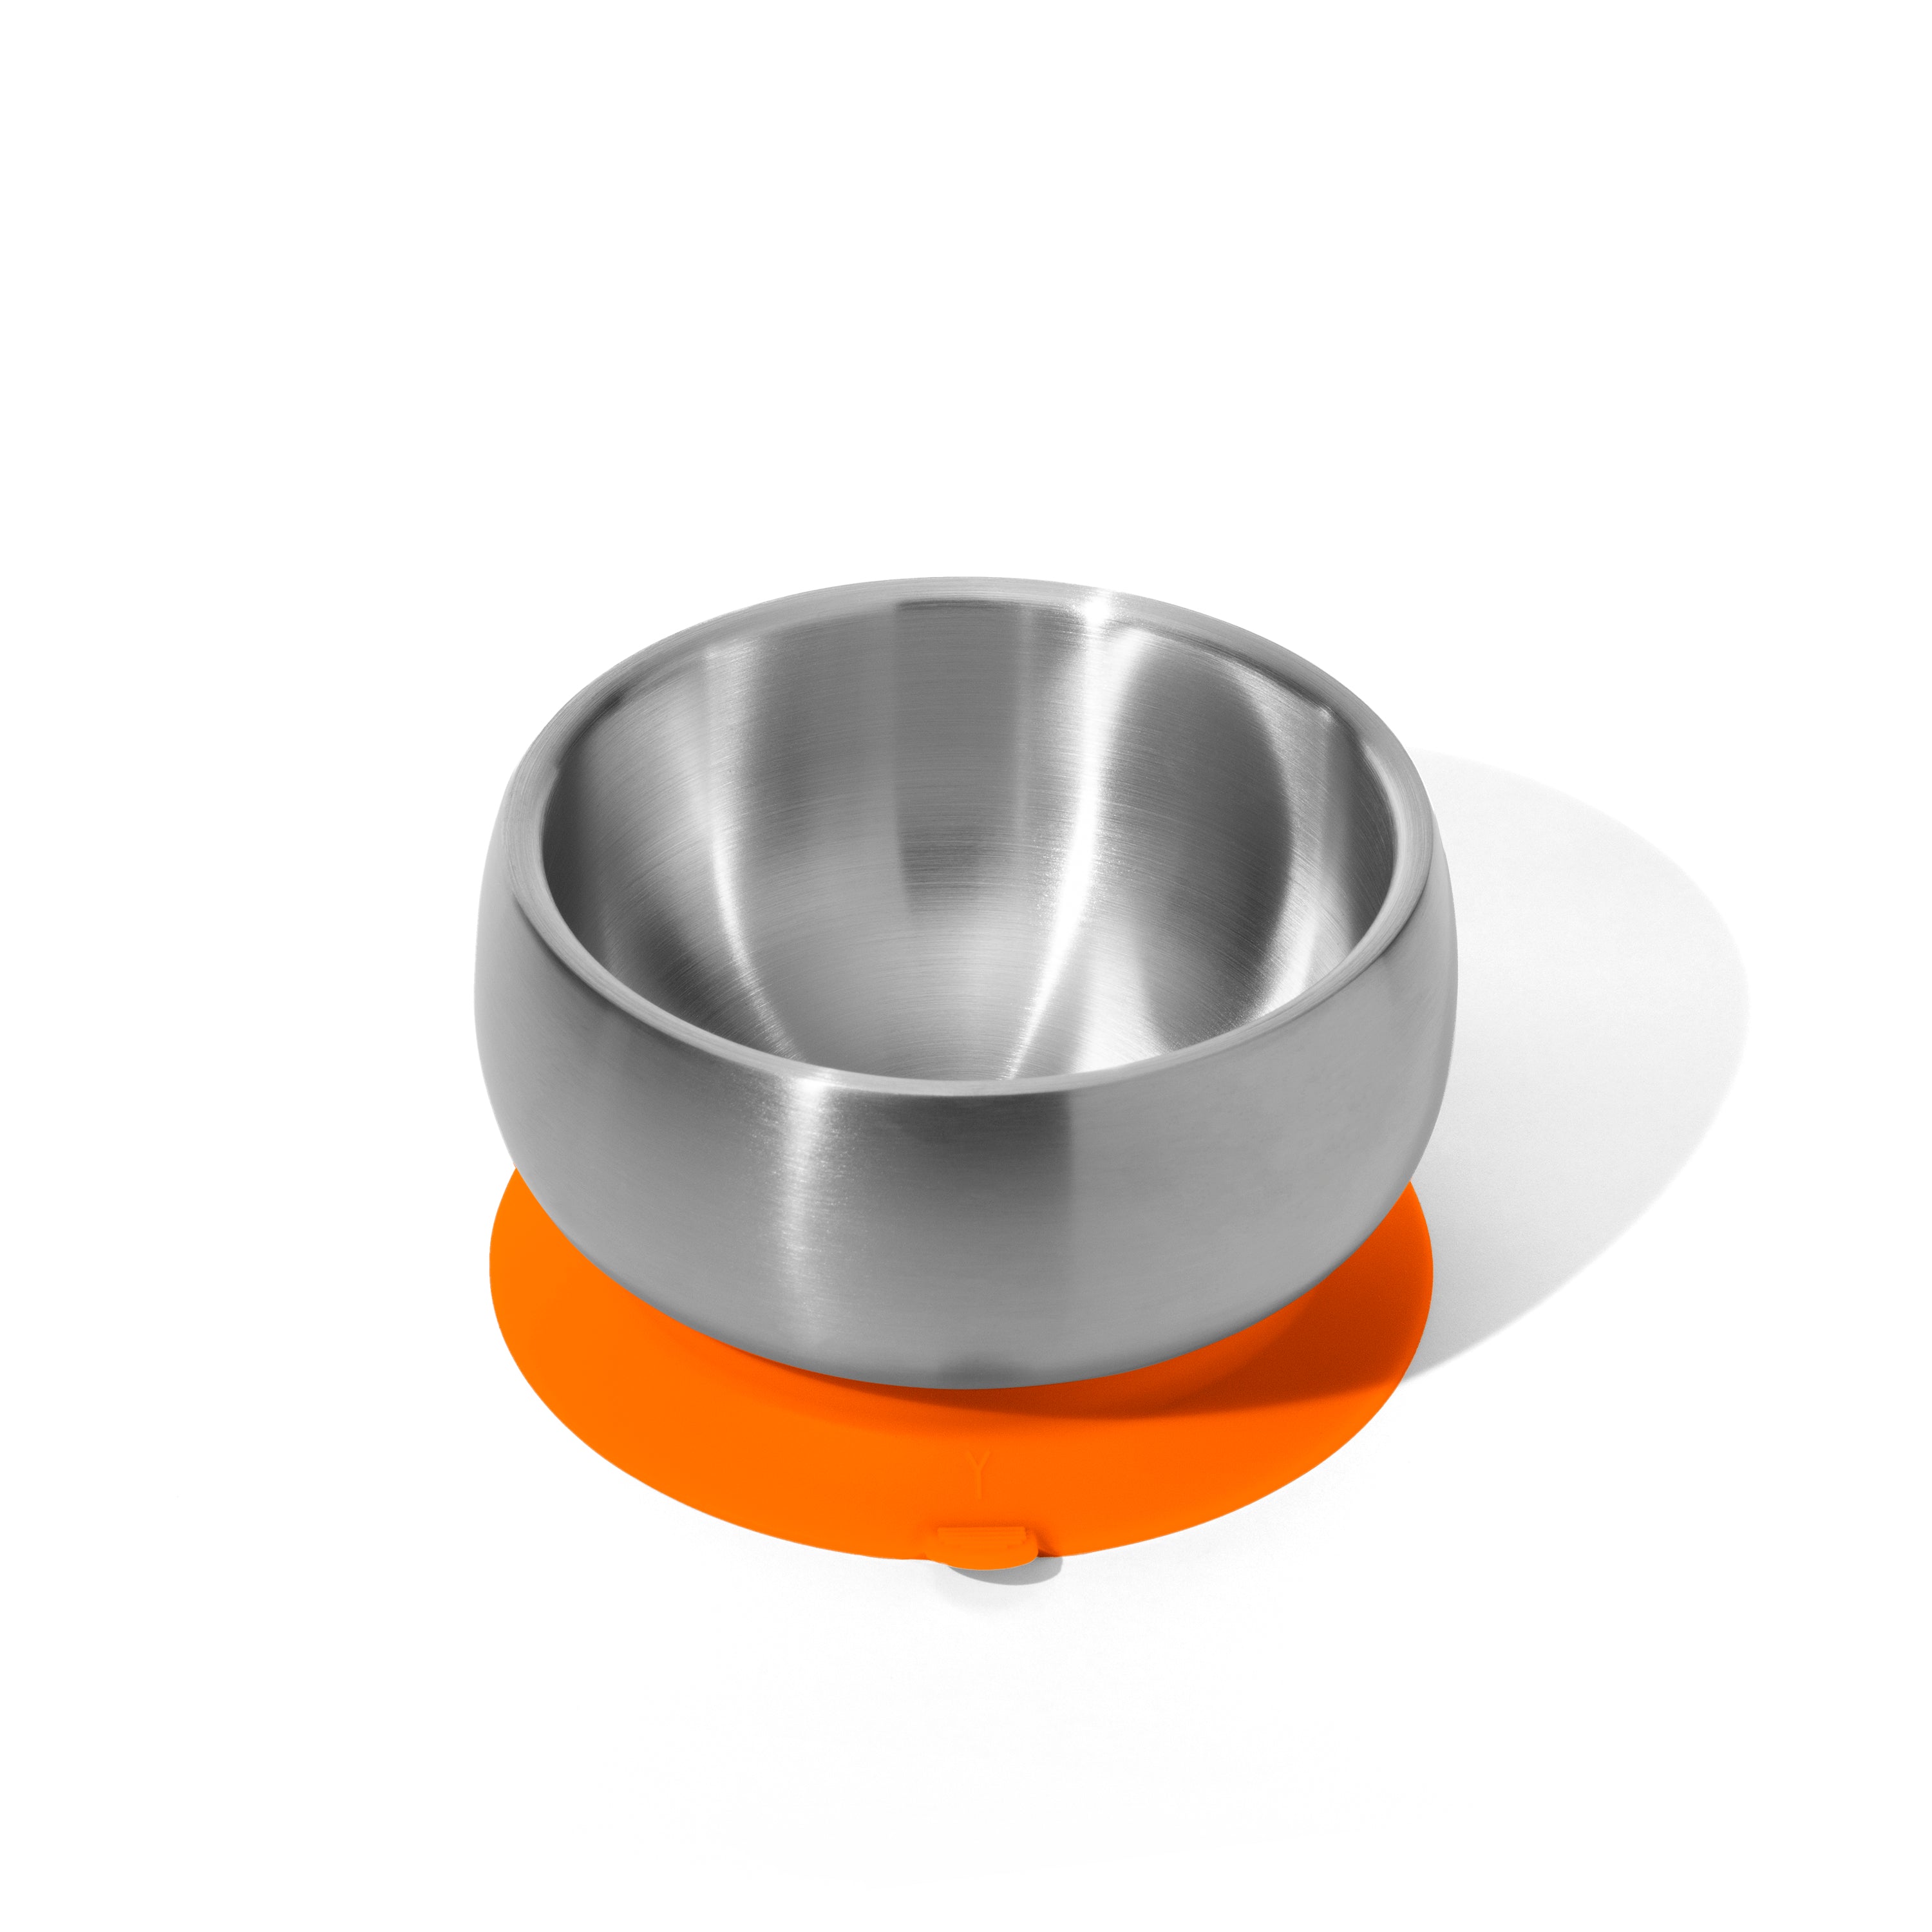 Avanchy Stainless Steel Baby Bowl With Lid - Orange